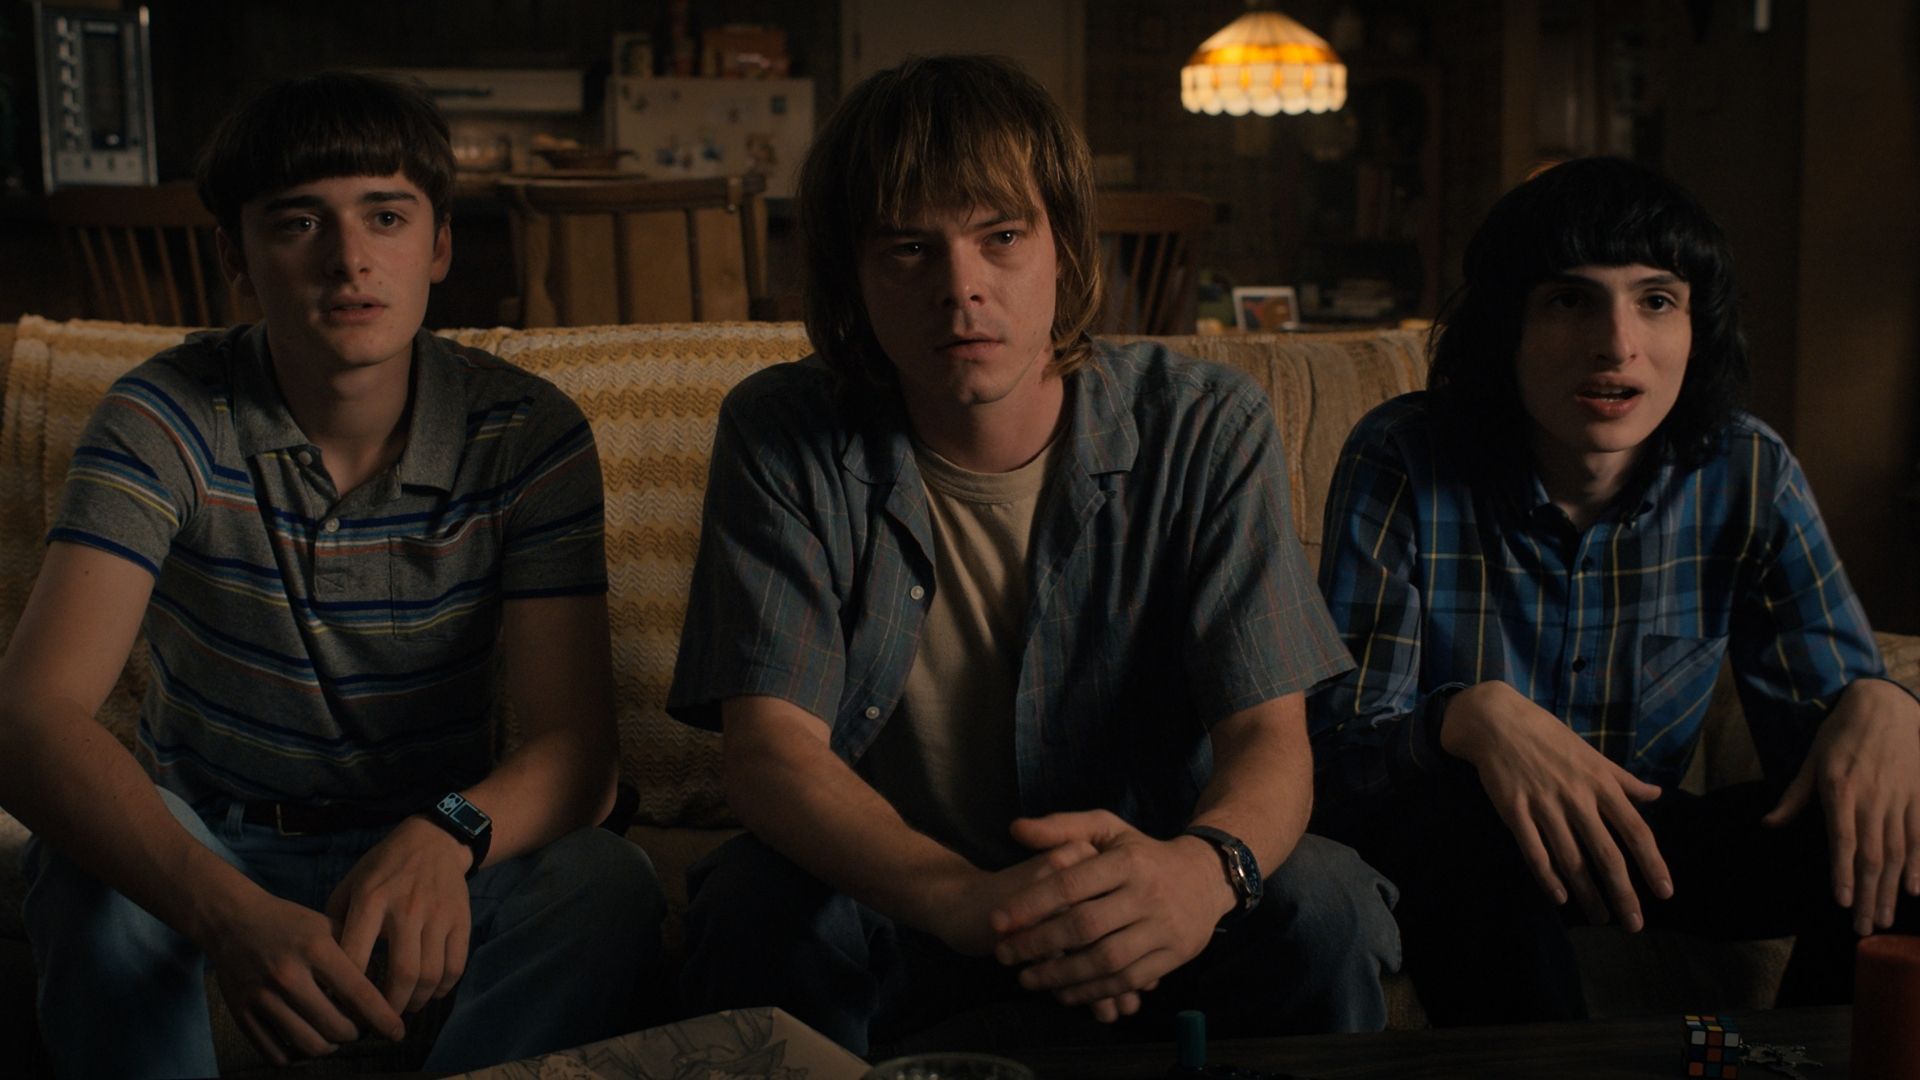 Is Will Byers in Stranger Things gay? We might be asking the wrong question